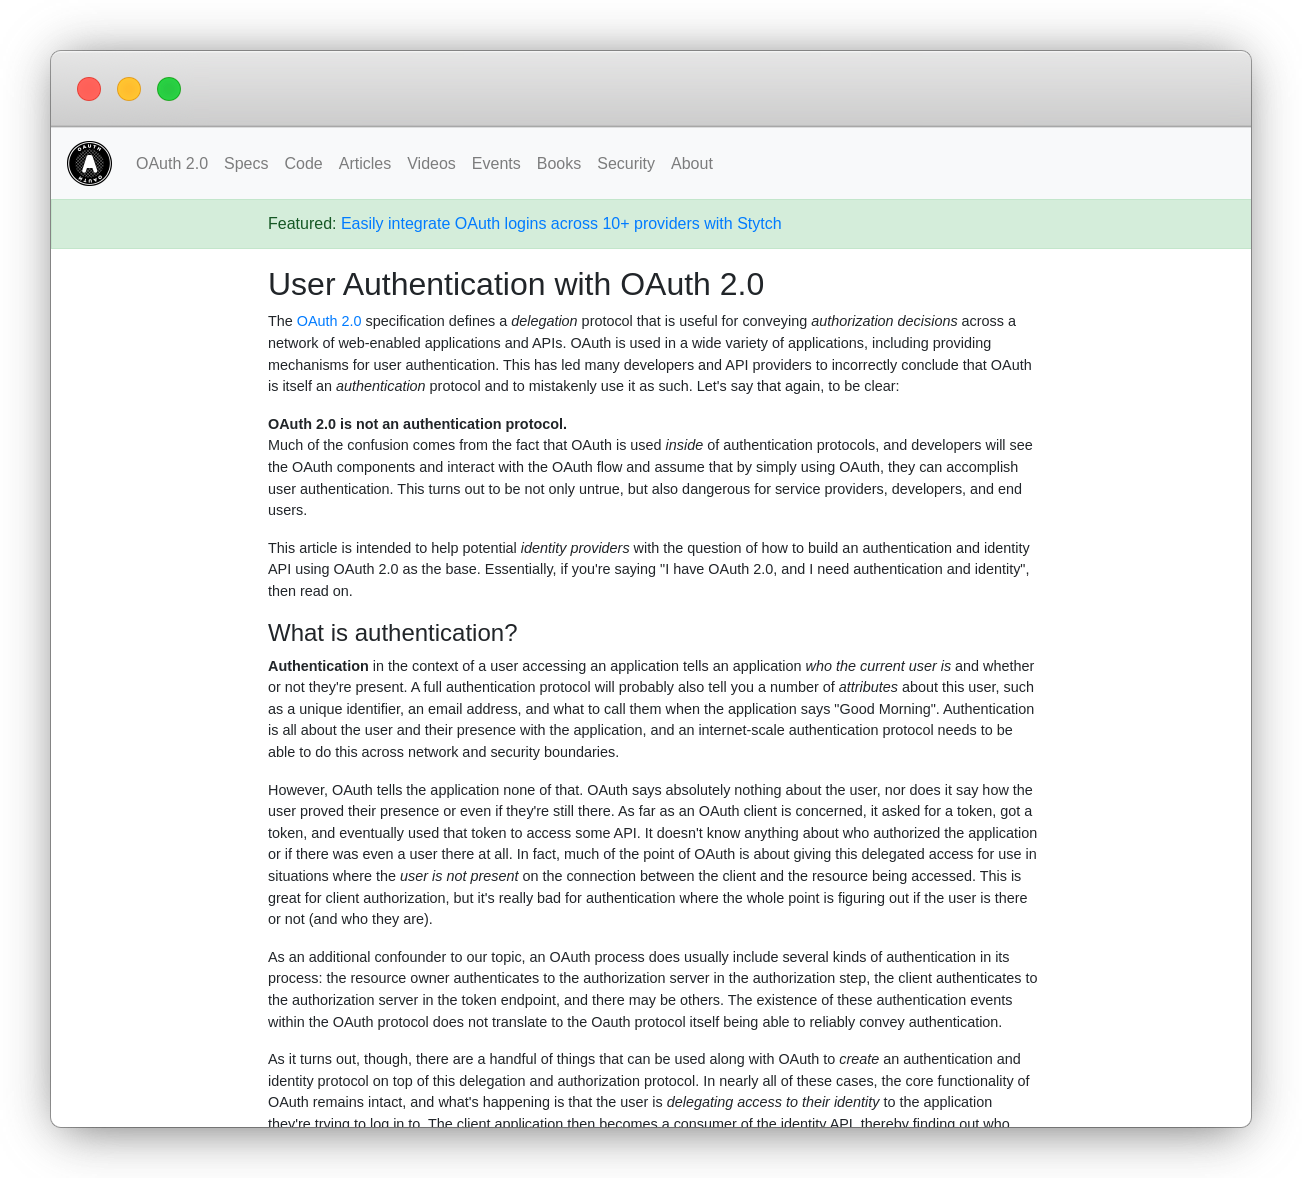 OAuth is not Authentication